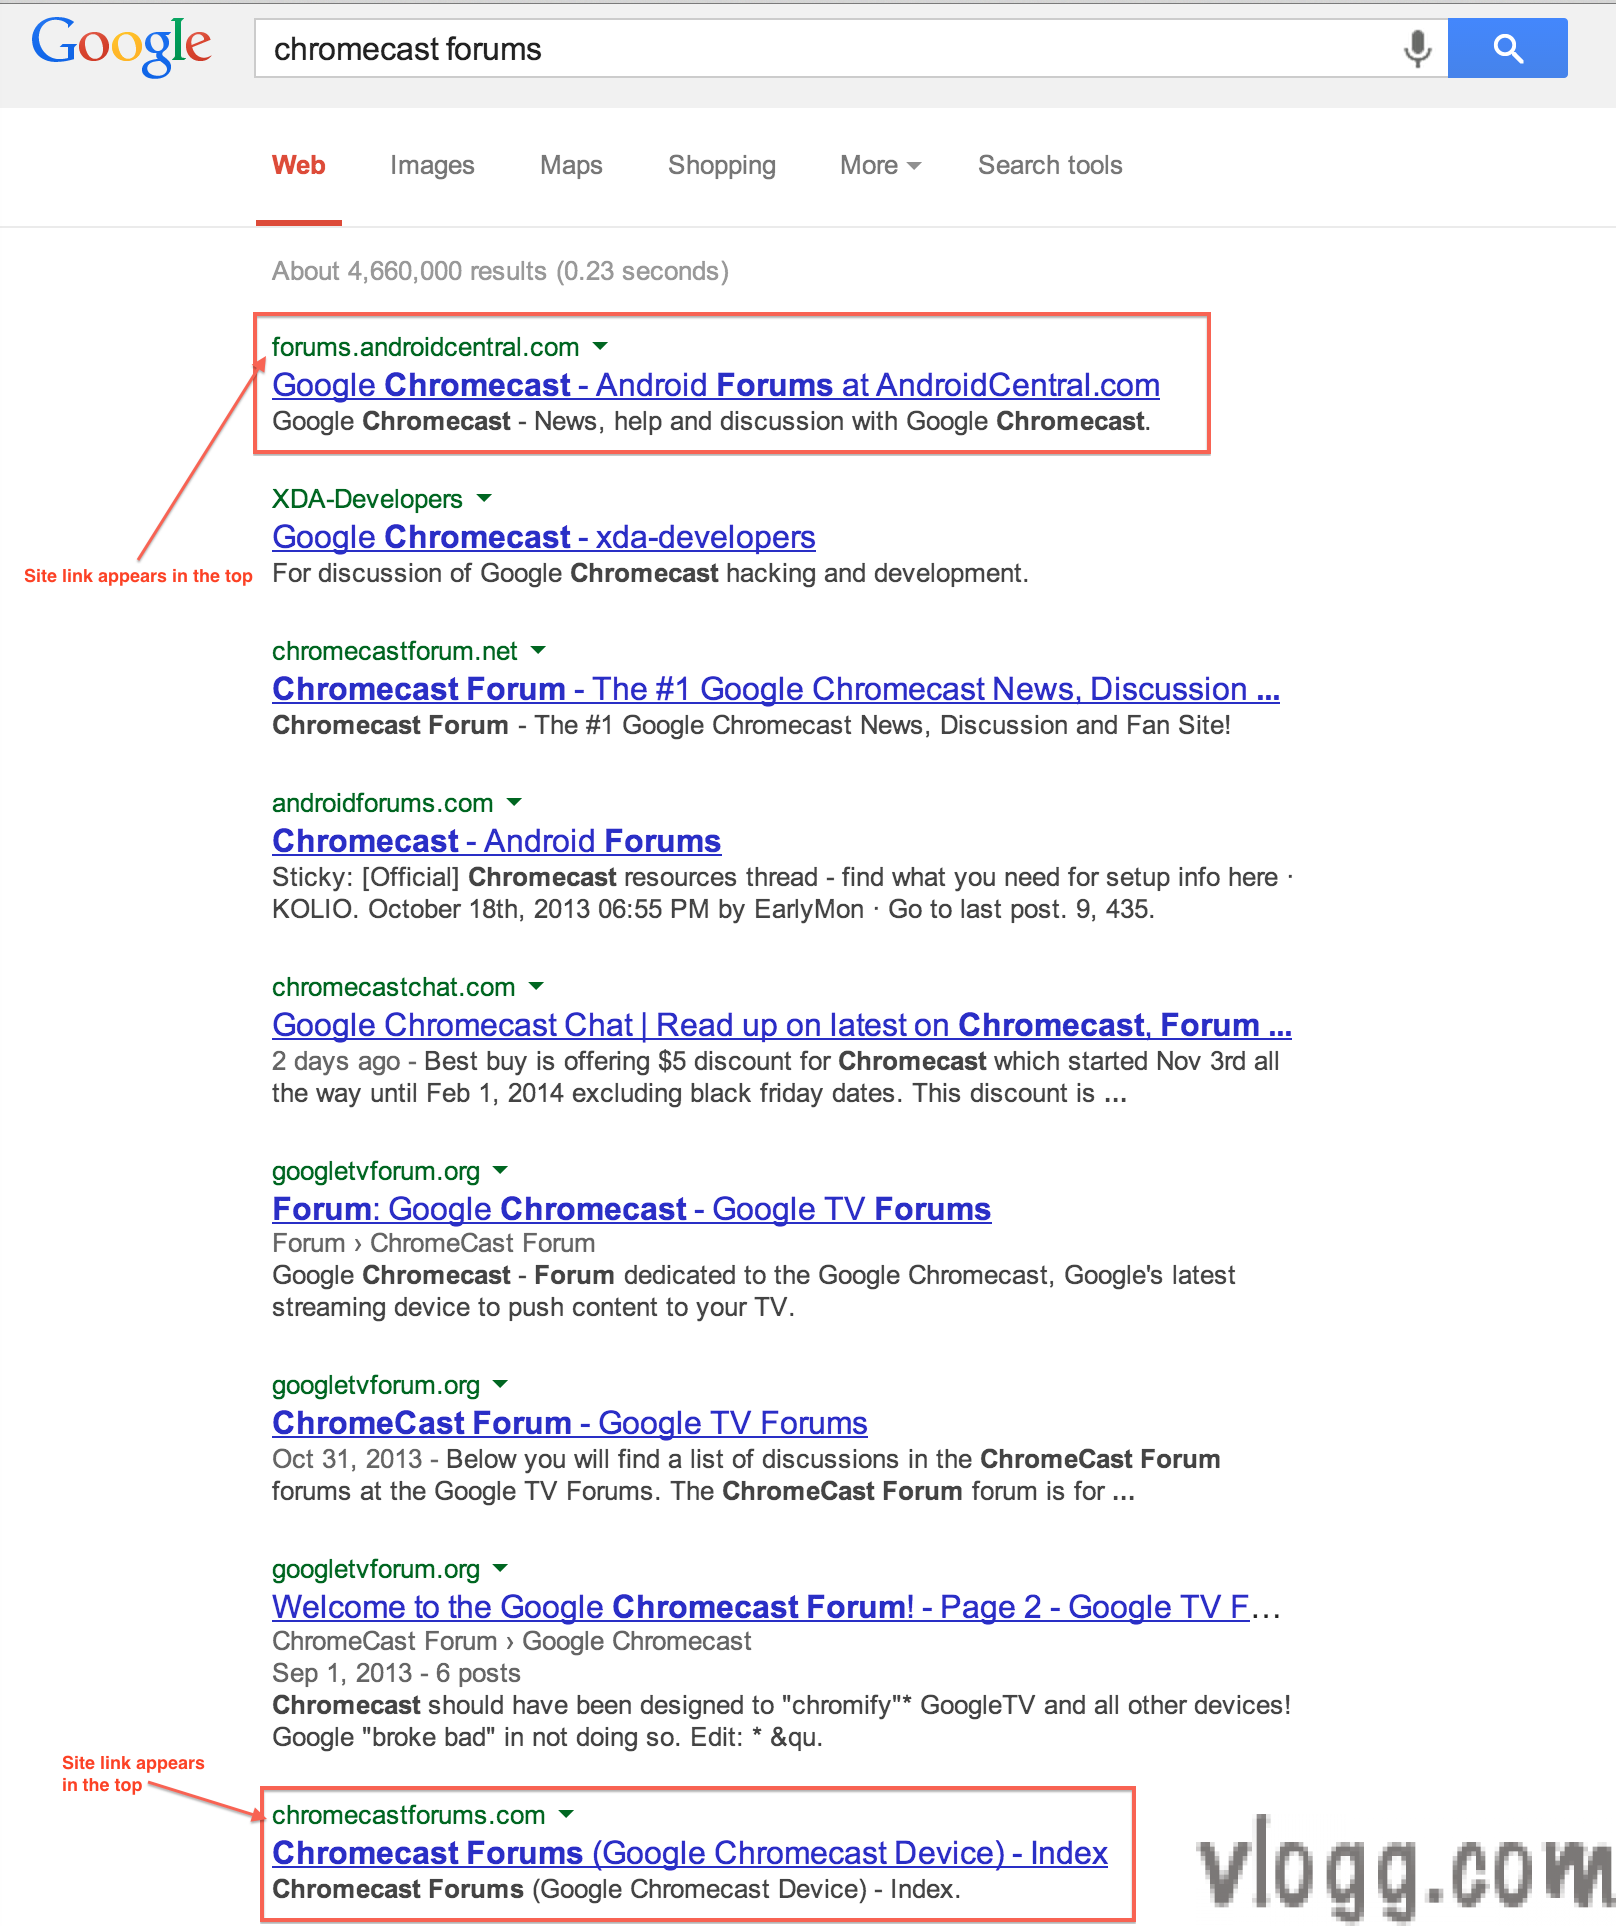 Google Search Results with Sitelinks appearing in the top